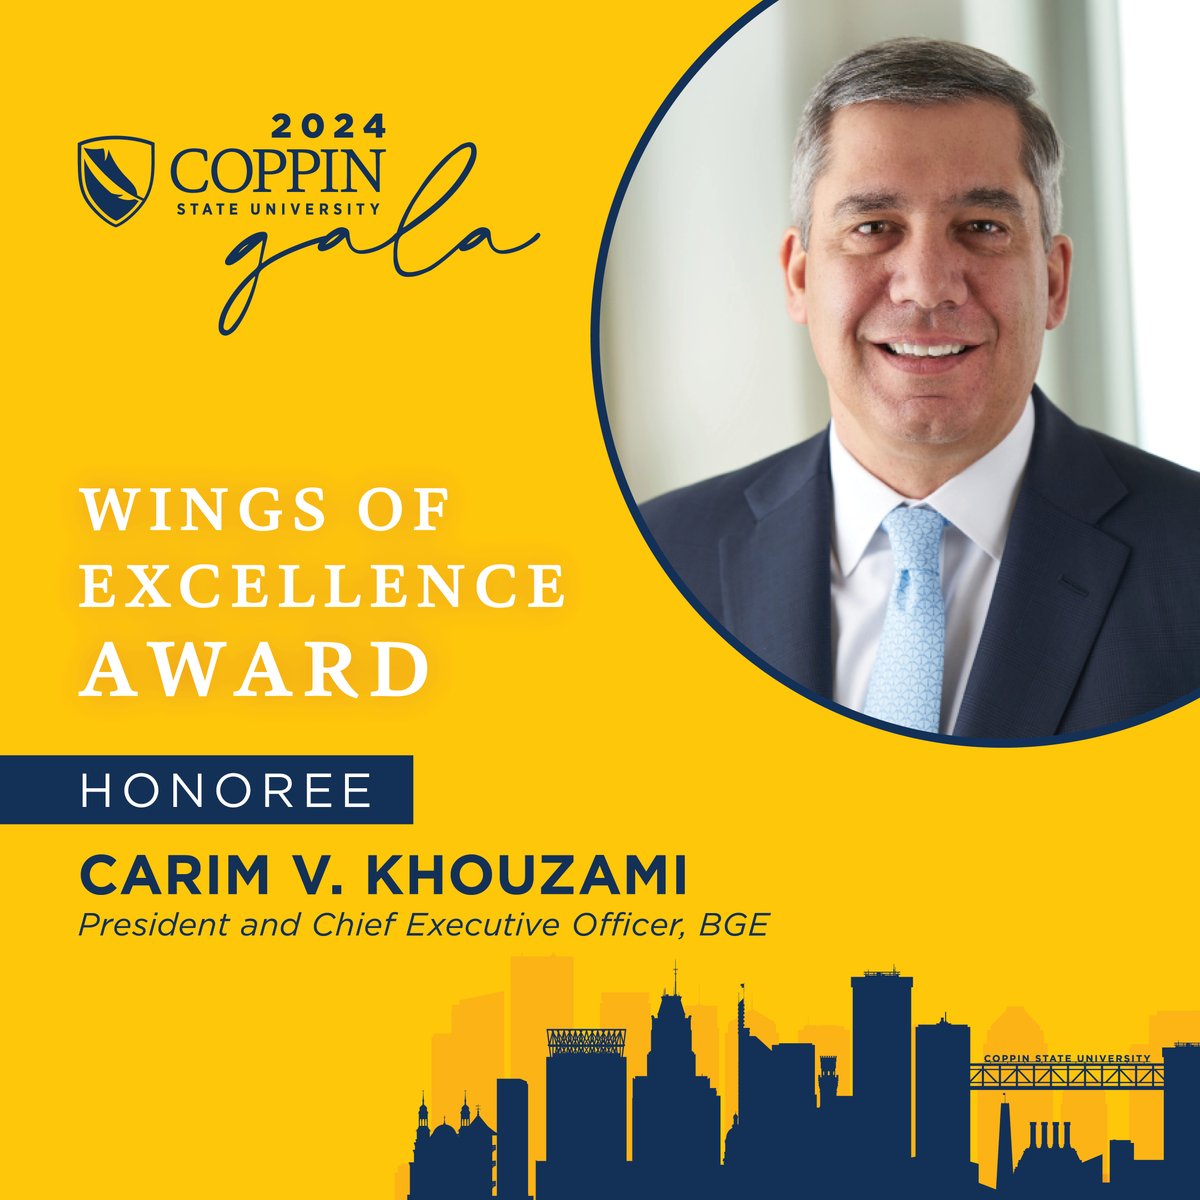 Excited to announce Carim V. Khouzami, President & CEO of @MyBGE, as the recipient of the Wings of Excellence Award at this year's Coppin State University Gala! 🏆 Join us in celebrating Carim's commitment to community leadership and philanthropy!